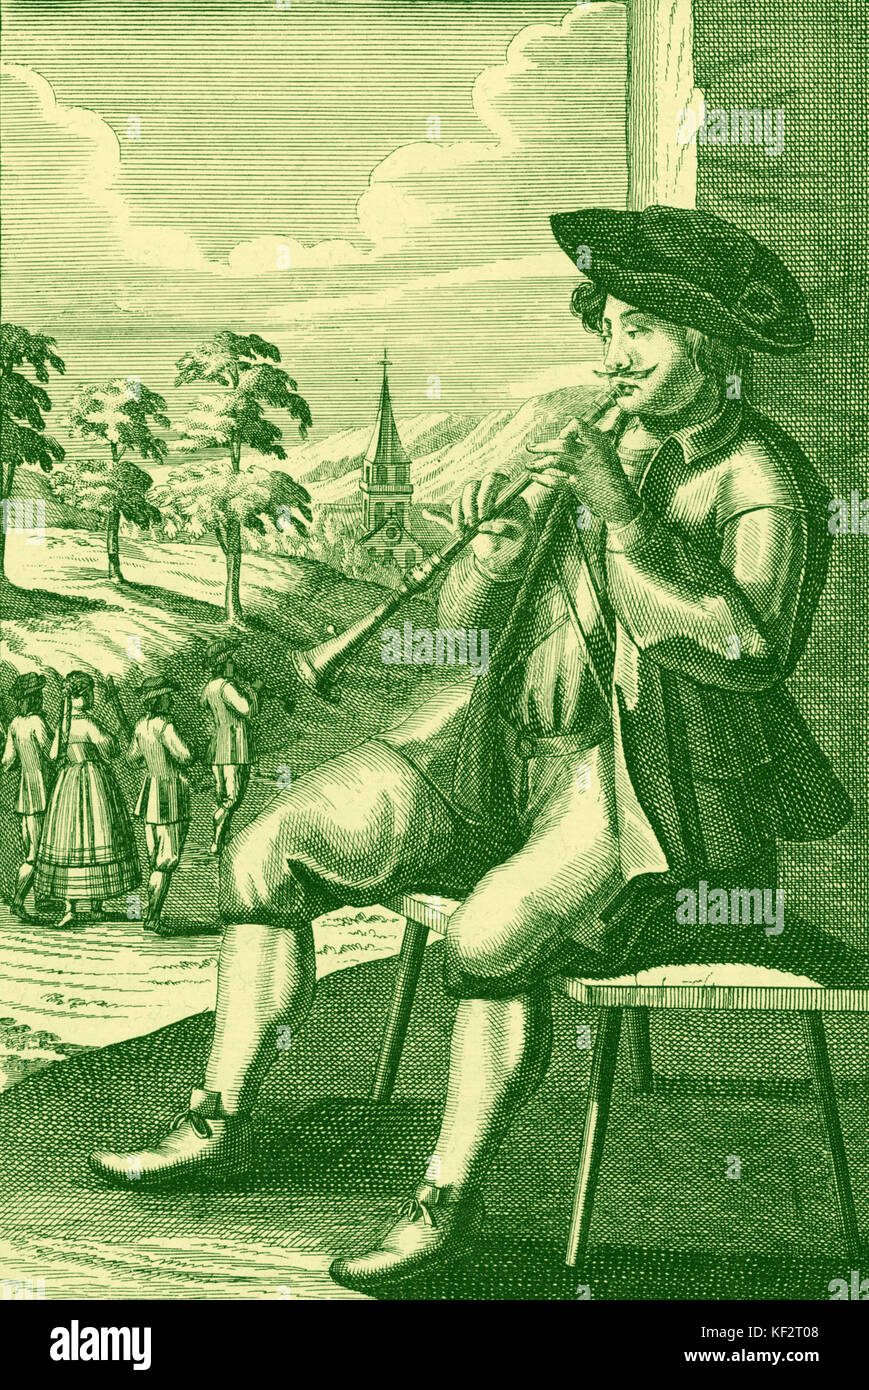 Early 18th century engraving of man with shawm. Engraving by J C Weigel (1661-1726). Early woodwind instrument, forerunner of oboe. Stock Photo